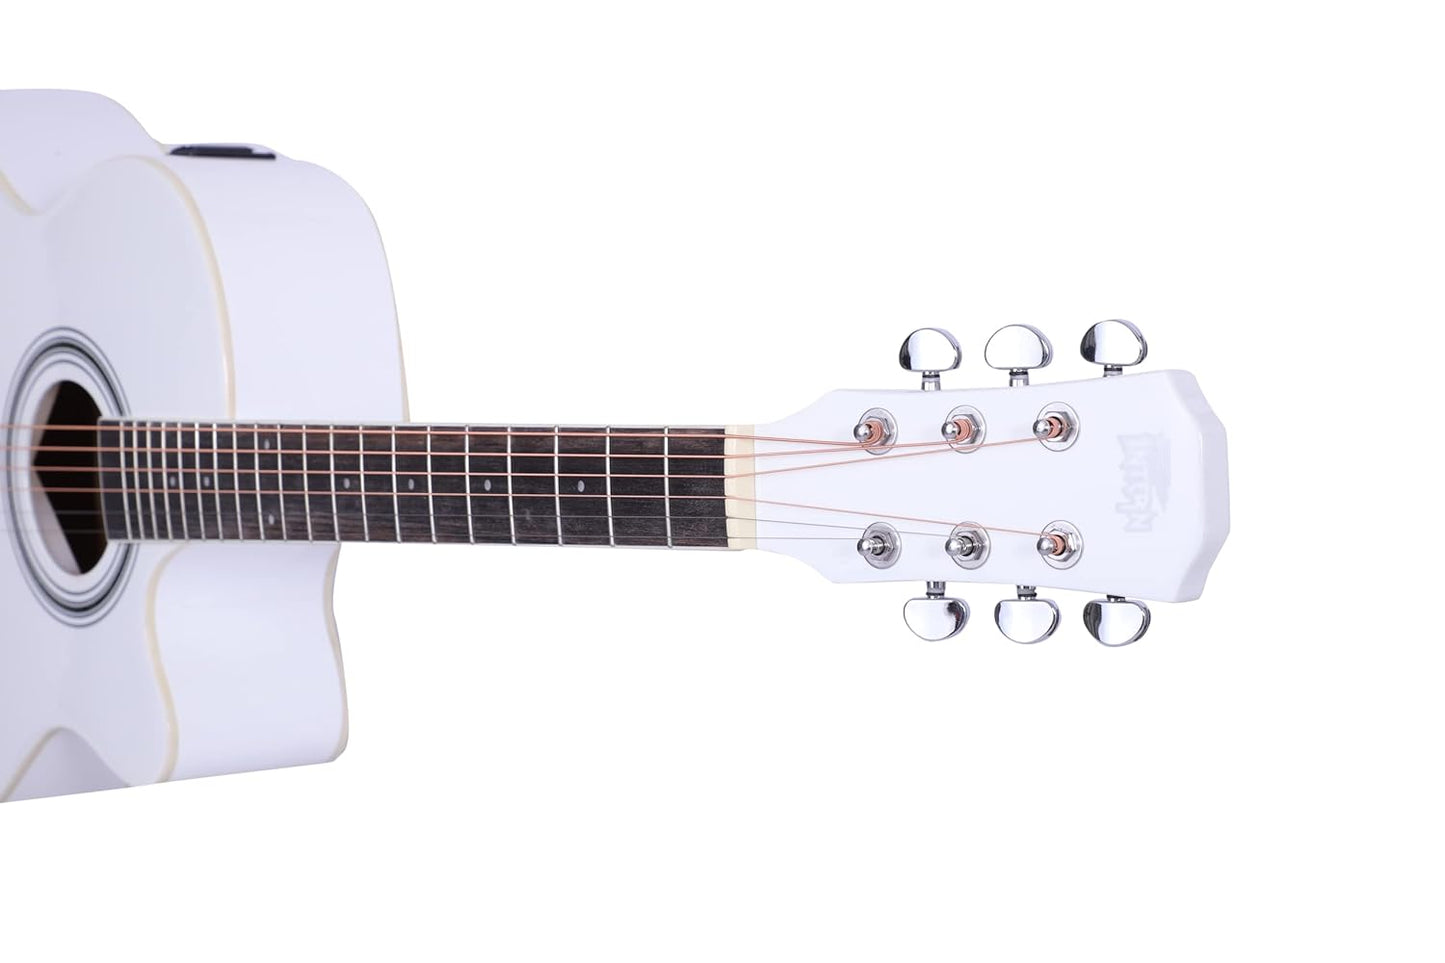 INTERN 40 inches Acoustic Guitar with Pick-up & truss rod, carry bag, strings pack, strap & picks. Premium Wooden durable built, Best tonal stability with professional sound amplificaiton. (White).